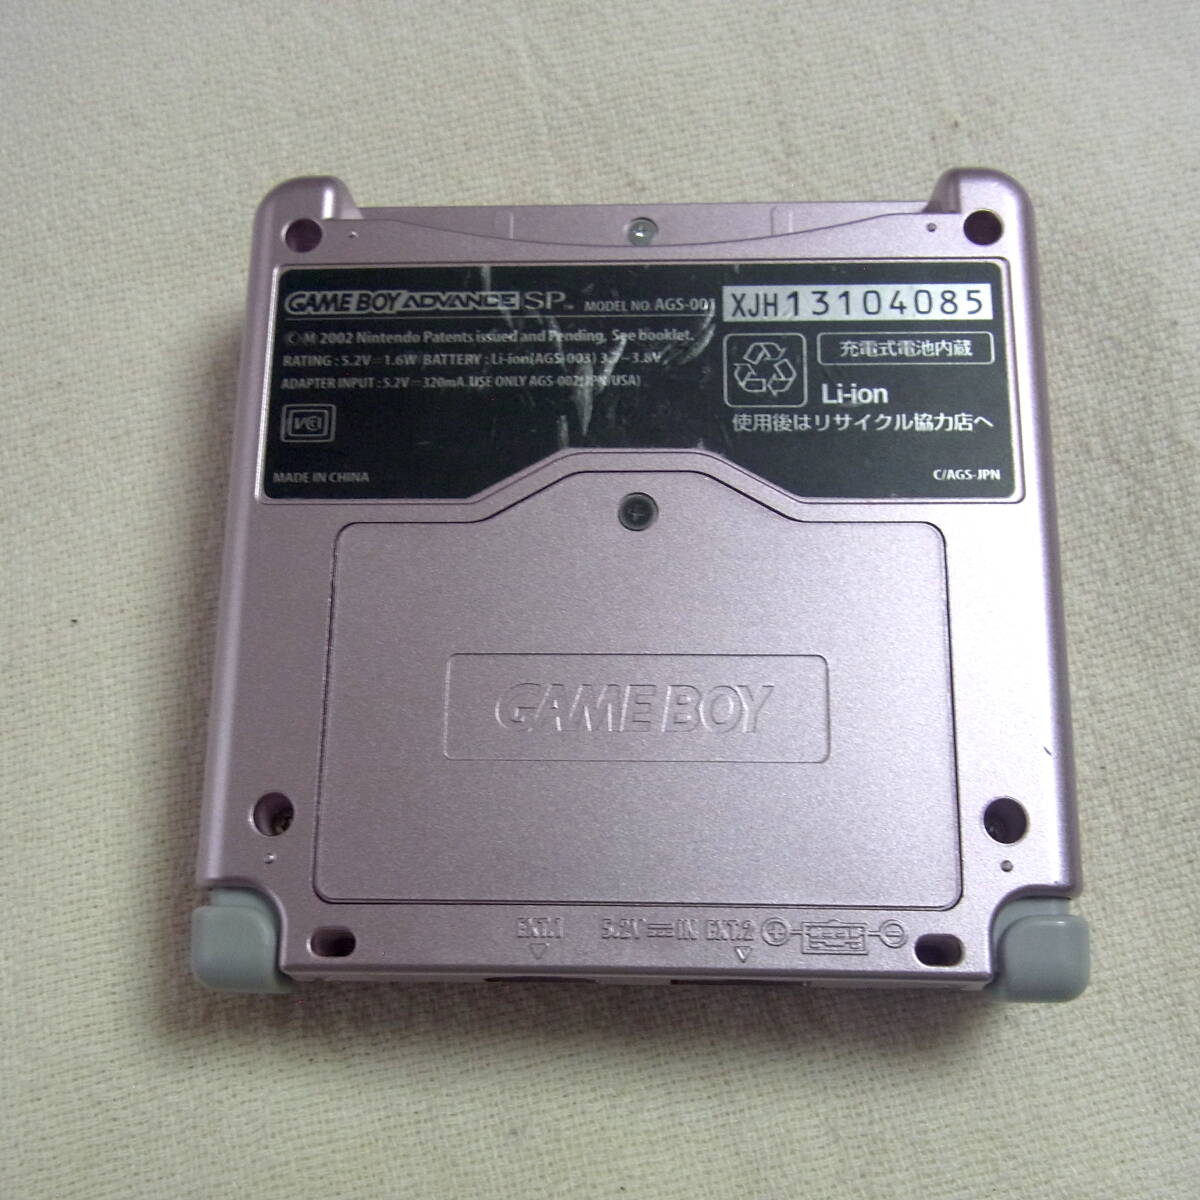  Game Boy Advance SP[ body ] nintendo | pearl pink | operation verification ending |AGS-001|GBASP| special |Nintendo GAME BOY ADVANCE